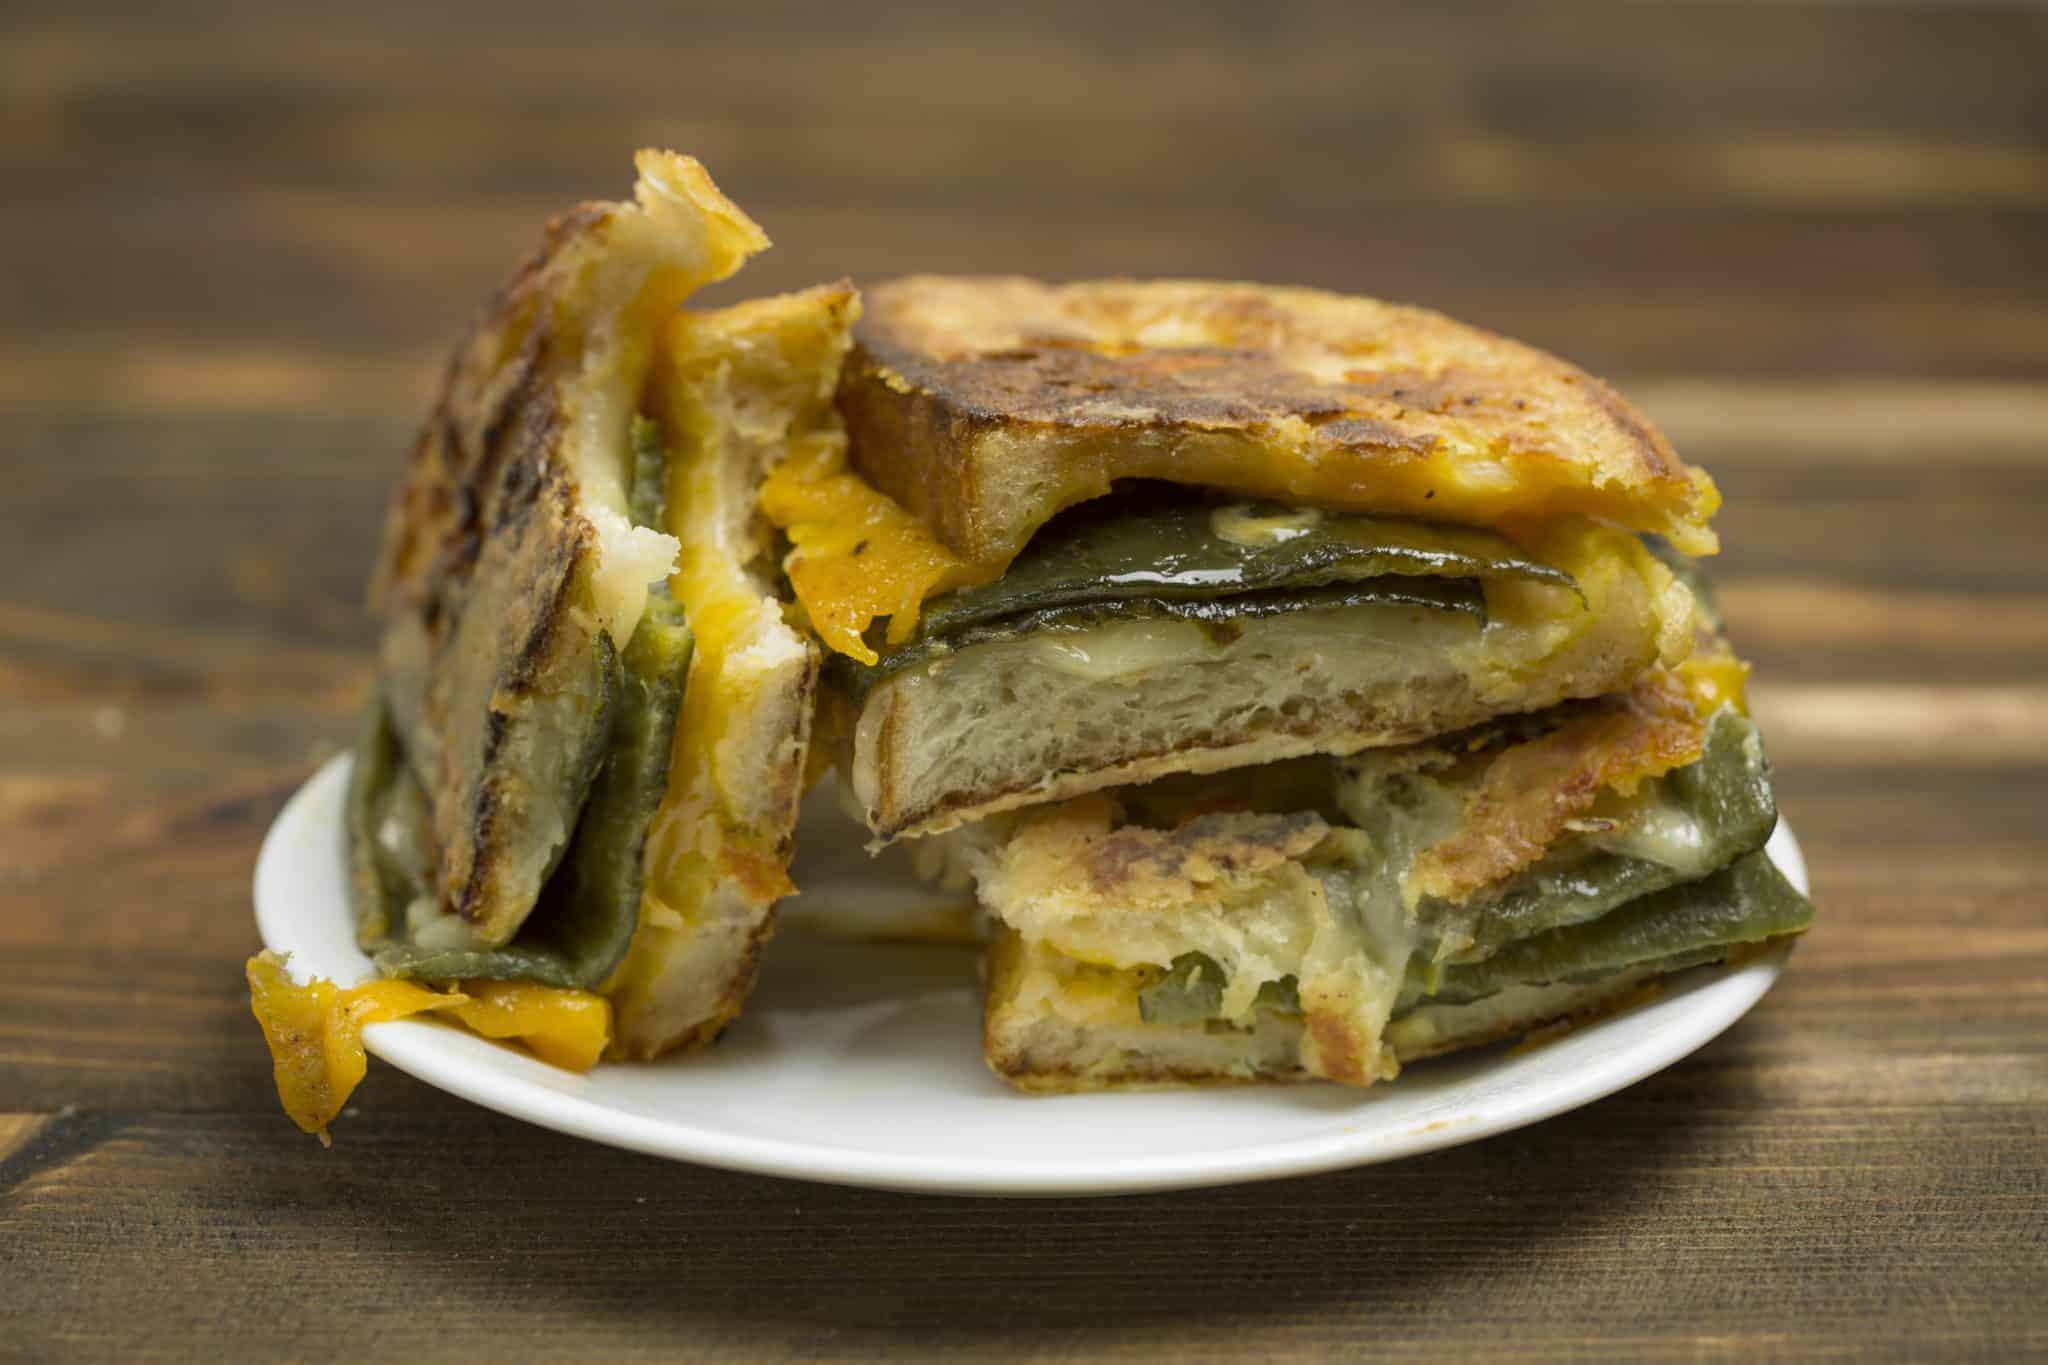 Chile Relleno Monte Cristo is a classic grilled cheese with pepper jack, cheddar and green chile and then battered and fried  Monte Cristo style. #montecristo #chilerelleno www.savoryexperiments.com 